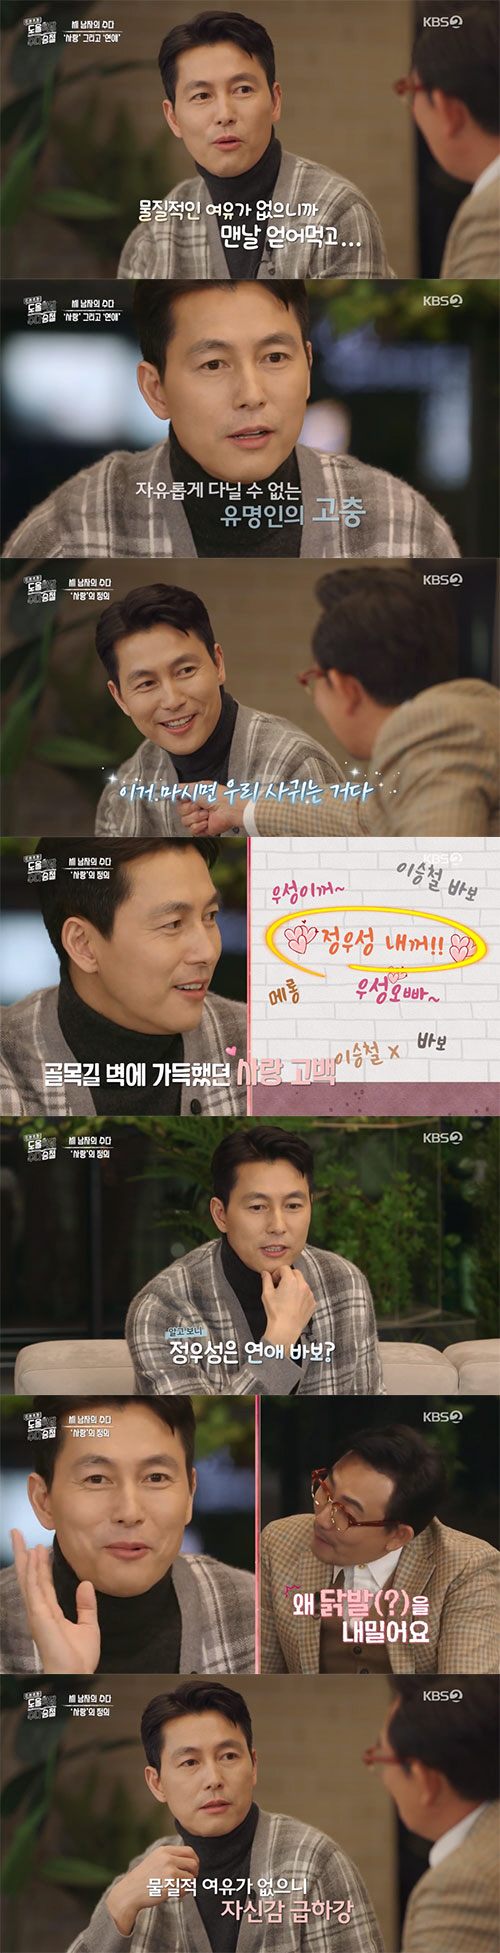 Actor Jung Woo-sung Confessions a Story of LoveOn the 18th KBS 2TV King Sejong Institute Suh Seung Chul, the second time, the philosopher Dool Kim Yong-ok and singer Lee Seung-cheol, and the actor Jung Woo-sung shared their love stories with each other.On this day, Jung Woo-sung introduced Todays theme is love, and Lee Seung-cheol asked Kim Yong-ok, Is not it foamy because the actor introduces it?Lee Seung-cheol asked Jung Woo-sung, Are you having a good love? Jung Woo-sung said, You should always do the tombs. Lee Seung-cheol said, I think there is something to avoid the answer.Lee Seung-cheol also said, I was invited to Mr. Dools house.But there was a huge amount of books in the house, he said, and Door said, There will be hundreds of thousands of books. Lee Seung-cheol said, The unique thing was that the toilet toilet was facing each other, and Door surprised everyone by saying, I sit down and talk because I spend about 30 minutes watching a big thing.Kim Yong-ok talked about love affection in Confucianism.Kim Yong-ok said, The child in Confucianism is caught; she cares about her wife; thats love, attracting Eye-catching.Kim Yong-ok said, The lyrics of Lee Seung-cheol are all love.However, the love of each song is different, he said, embarrassed Lee Seung-cheol, and Lee Seung-cheol laughed, saying, I do not write all the songs. Lee Seung-cheol asked Jung Woo-sung, Have you ever been kicked by a woman? and Jung Woo-sung said, Of course it is. Its a court story.I did not have enough material, so I always ate it. I also lived a model life, but it was not easy. Kim Yong-ok and Lee Seung-cheol were talking about love history and talked with the consensus that their wives were two years old.Lee Seung-cheol said, Jung Woo-sung also talked about it.At this time, Jung Woo-sung laughed at me, saying, Why do you put me in the love affair of two people? I tried to go out for a while.Lee Seung-cheol told Jung Woo-sung, Did not you have a public relationship?Wasnt it romantic for a woman friend?, Jung Woo-sung said, Its the job of Friend, the most uncomfortable man in the world. I could not have a routine date.It was a face that the whole nation knew. It was a free man. It was a useless and funny man Friend. Lee Seung-cheol said, When I saw Jung Woo-sung, it seems to be love like eros rather than agape love.I do not have a famous work, and Jung Woo-sung immediately told me that if you drink this, you will be dating. Jung Woo-sung said, When I was part-time at a hamburger shop, there were many graffiti called Jung Woo-sung in the alley to the bathroom.Jung Woo-sung said, I have not been in a lot of love. I also had no time to be in charge.So I did not say, Lets go to eat this. He mentioned when he was less confident.On the definition of love, Jung Woo-sung said, If you define love as a human being, love is to acknowledge your opponent.I say that it gives a sense of distance as much as I love, but I do not know. During the later debate, Dool Kim Yong-ok received the attention of everyone in the studio, saying that he chose to go out to love Siddhartha of India, who became a Buddha.Lee Seung-cheol, who listened to the explanation in detail, gave a serious exclamation and suddenly laughed at the Confessions, saying, I should go out.However, Lee Seung-cheol said, I have to think about it again.Jung Woo-sung heard Kim Yong-oks lecture and said, I often use the word love and seem to have been proud to know love well.After listening to the lecture, I learned the deep meaning of love again. In addition, as a result of his friendliest ambassador to the Refugee Organization, Jung Woo-sung said, The organization first contacted me; there was no reason to refuse; after the first mission, I became responsible.I also found out that the victims of the war were ordinary citizens. Especially, about the recent situation of receiving a bad comment about Refugee, It was not influenced by the bad thing.I just think its different from me. Lee Seung-cheol, who listened to this, said, I have also received a lot of evil.I sang a unified song on Dokdo with North Korean defectors, but I can not go because I do not have a visa in Japan. 